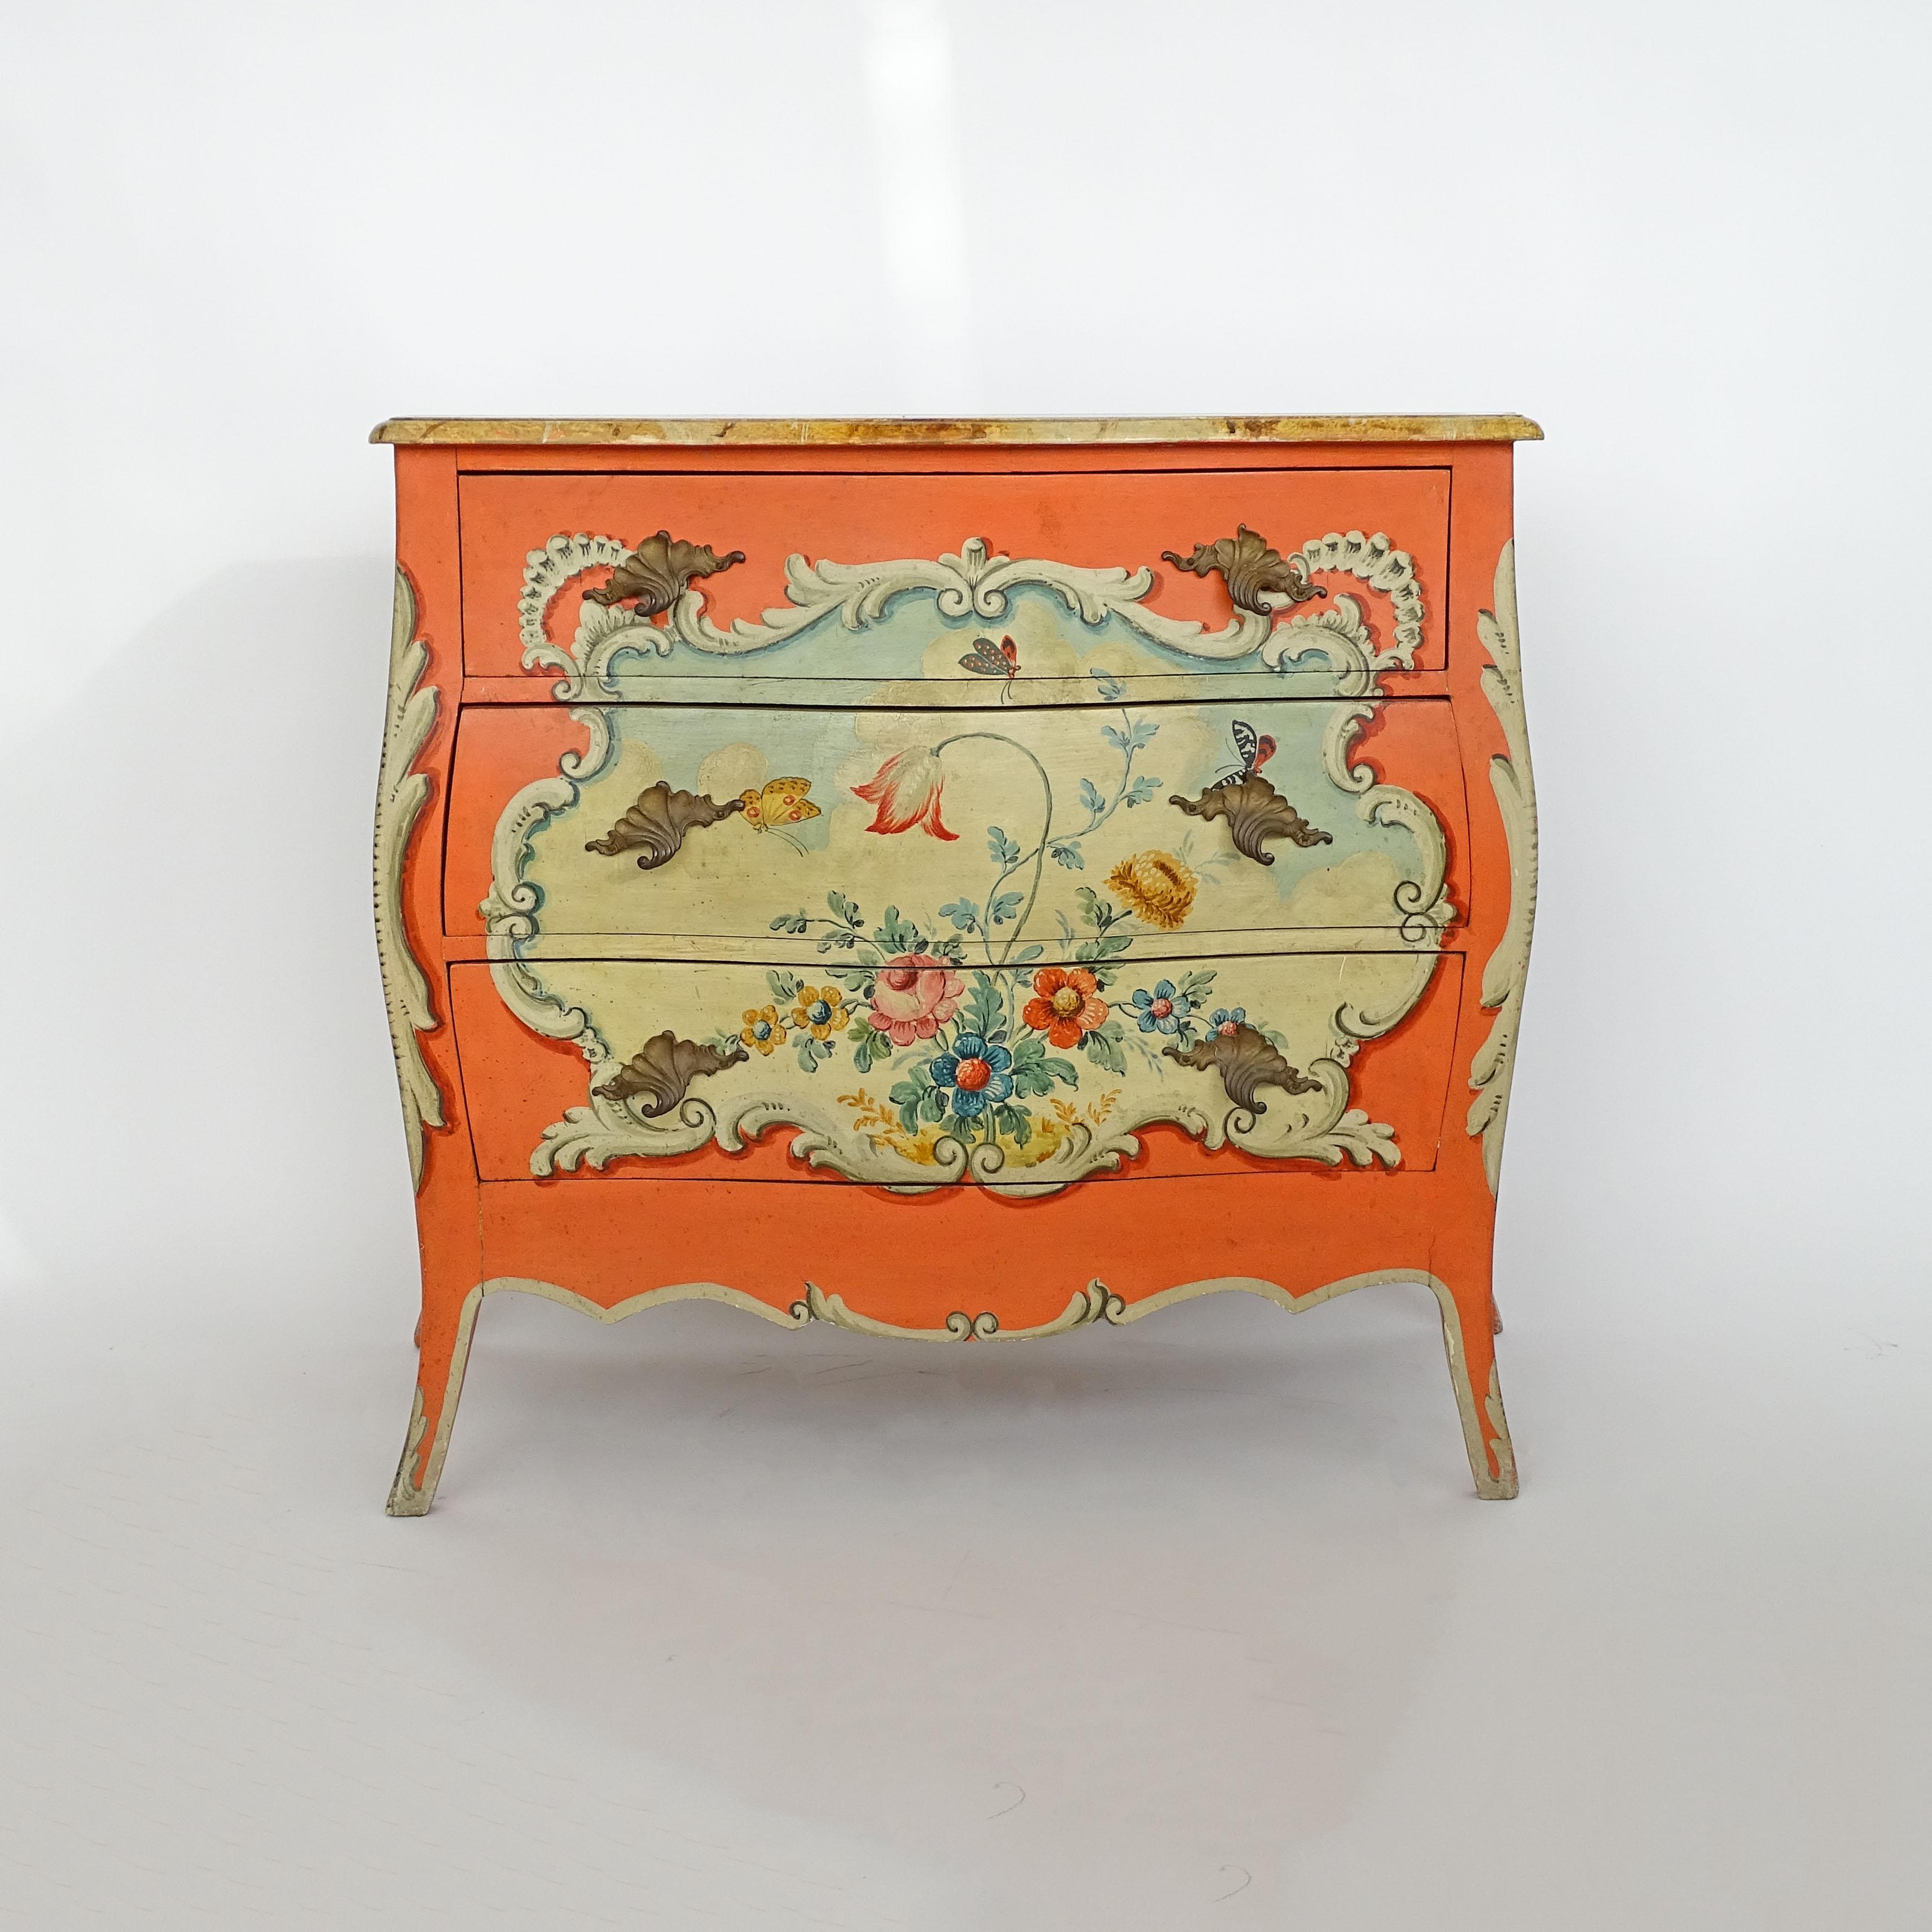 Splendid Italian 1940s flowers and butterflies painted commode.